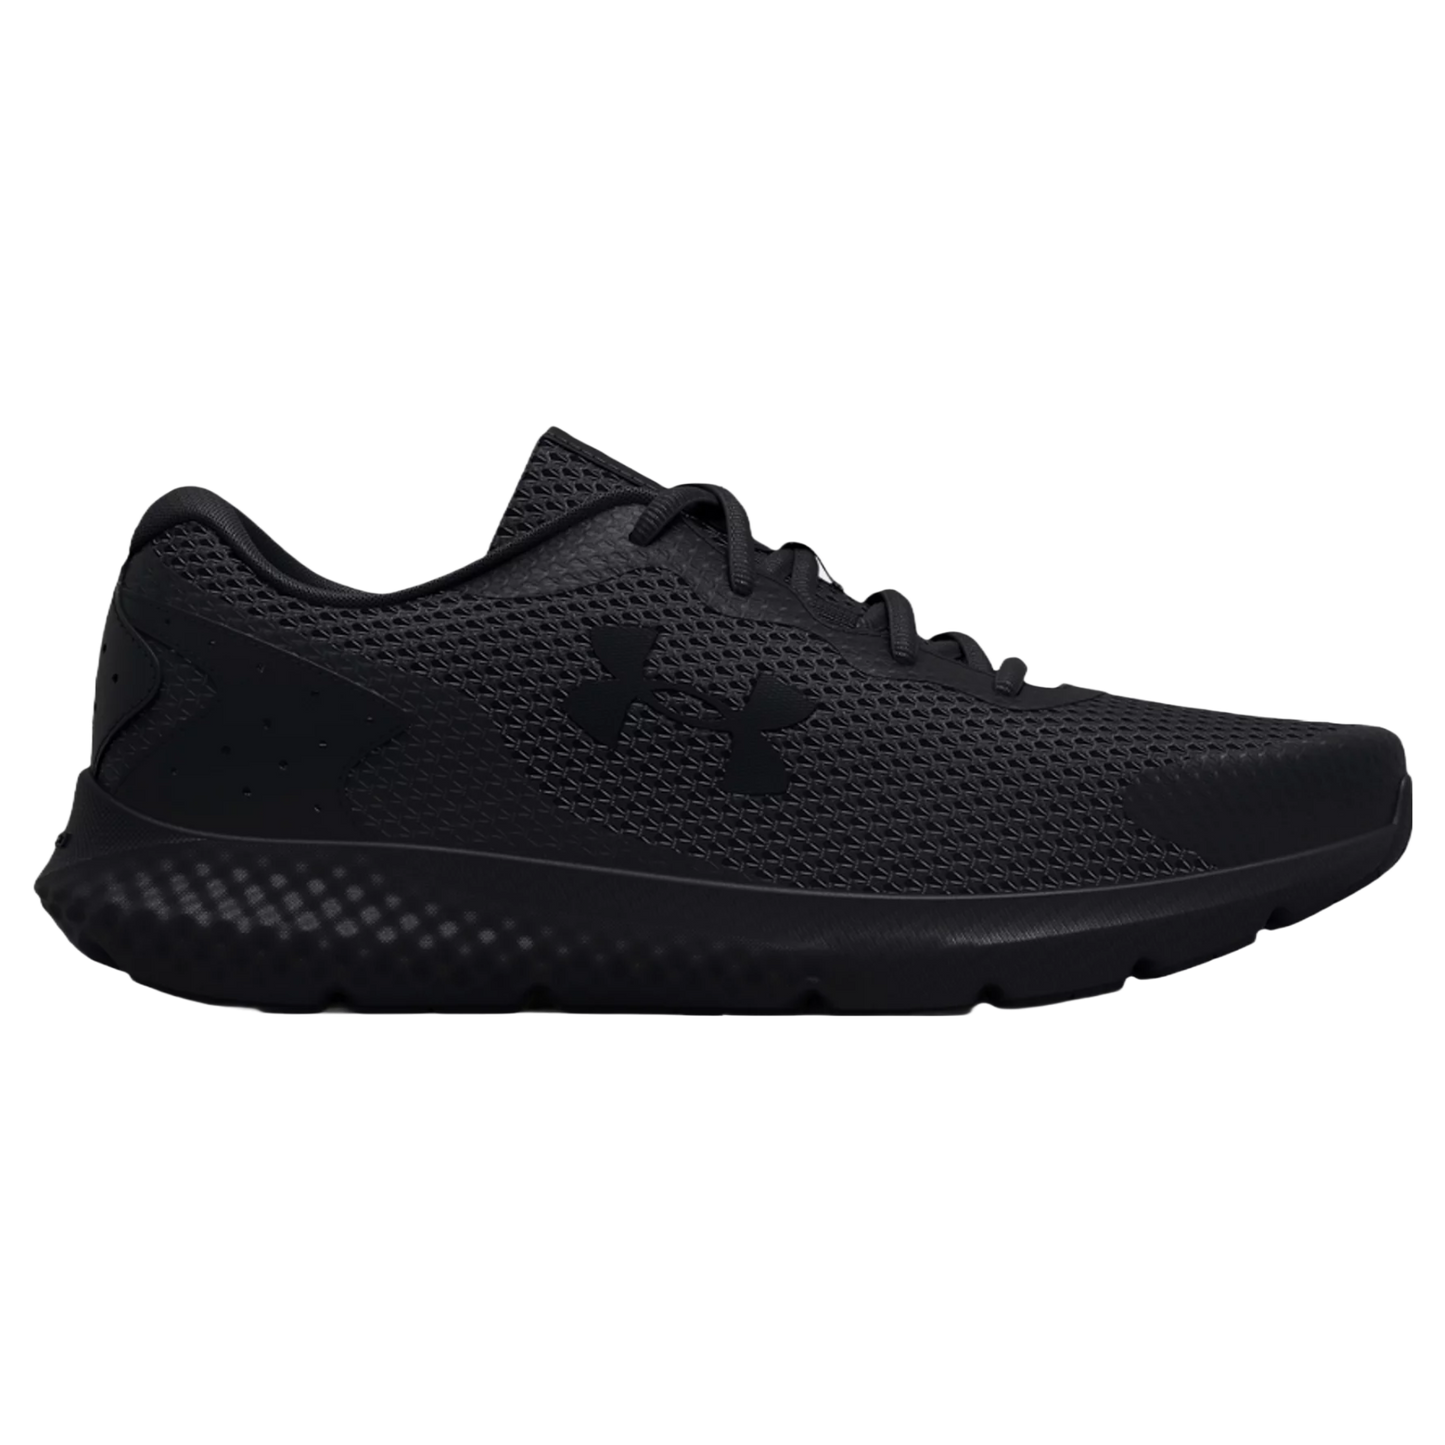 Under Armour Men's Charged Rogue 3 Black Running Shoes 3024877-003